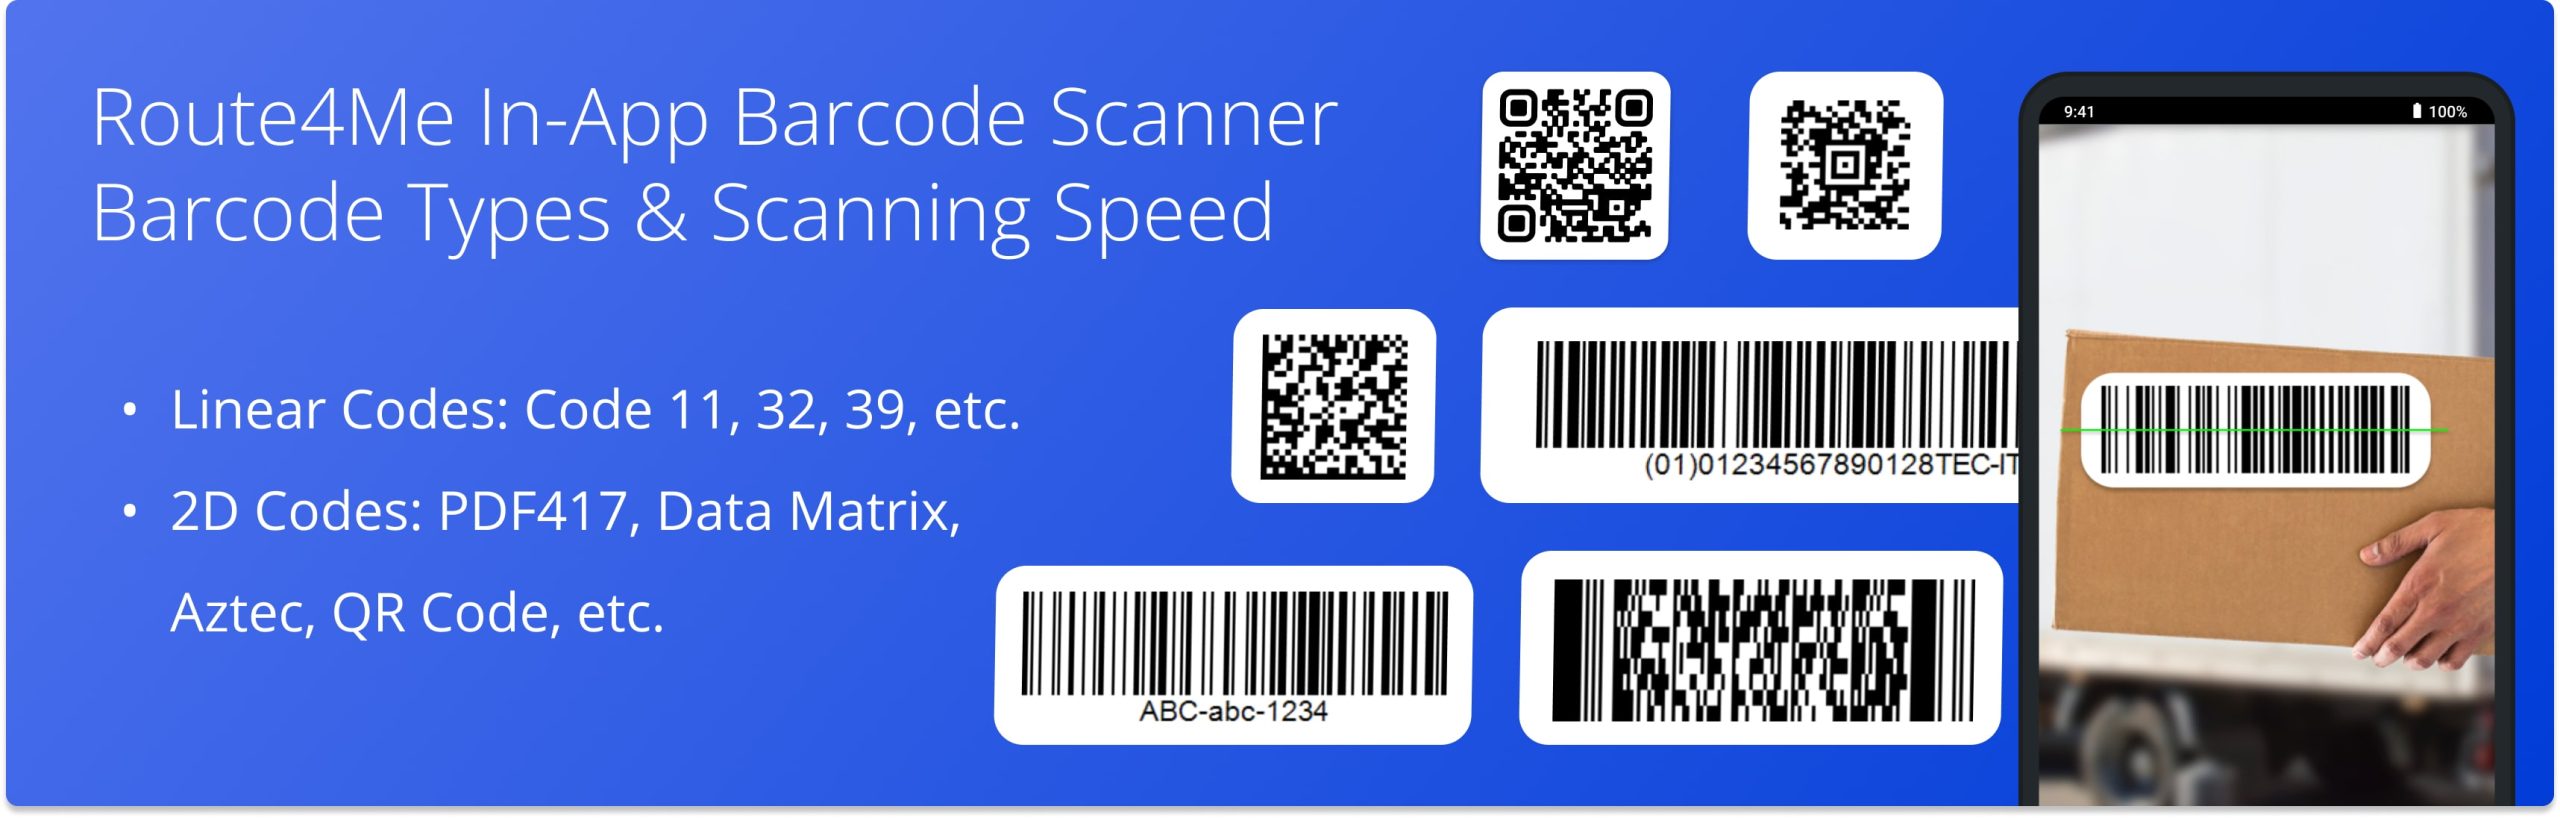 Route4Me's Android Route Planner in-app barcode scanner supports UPC, EAN, Data Matrix, PDF 417, Codes 11, 32, 39, 128, QR Codes, and other barcodes.